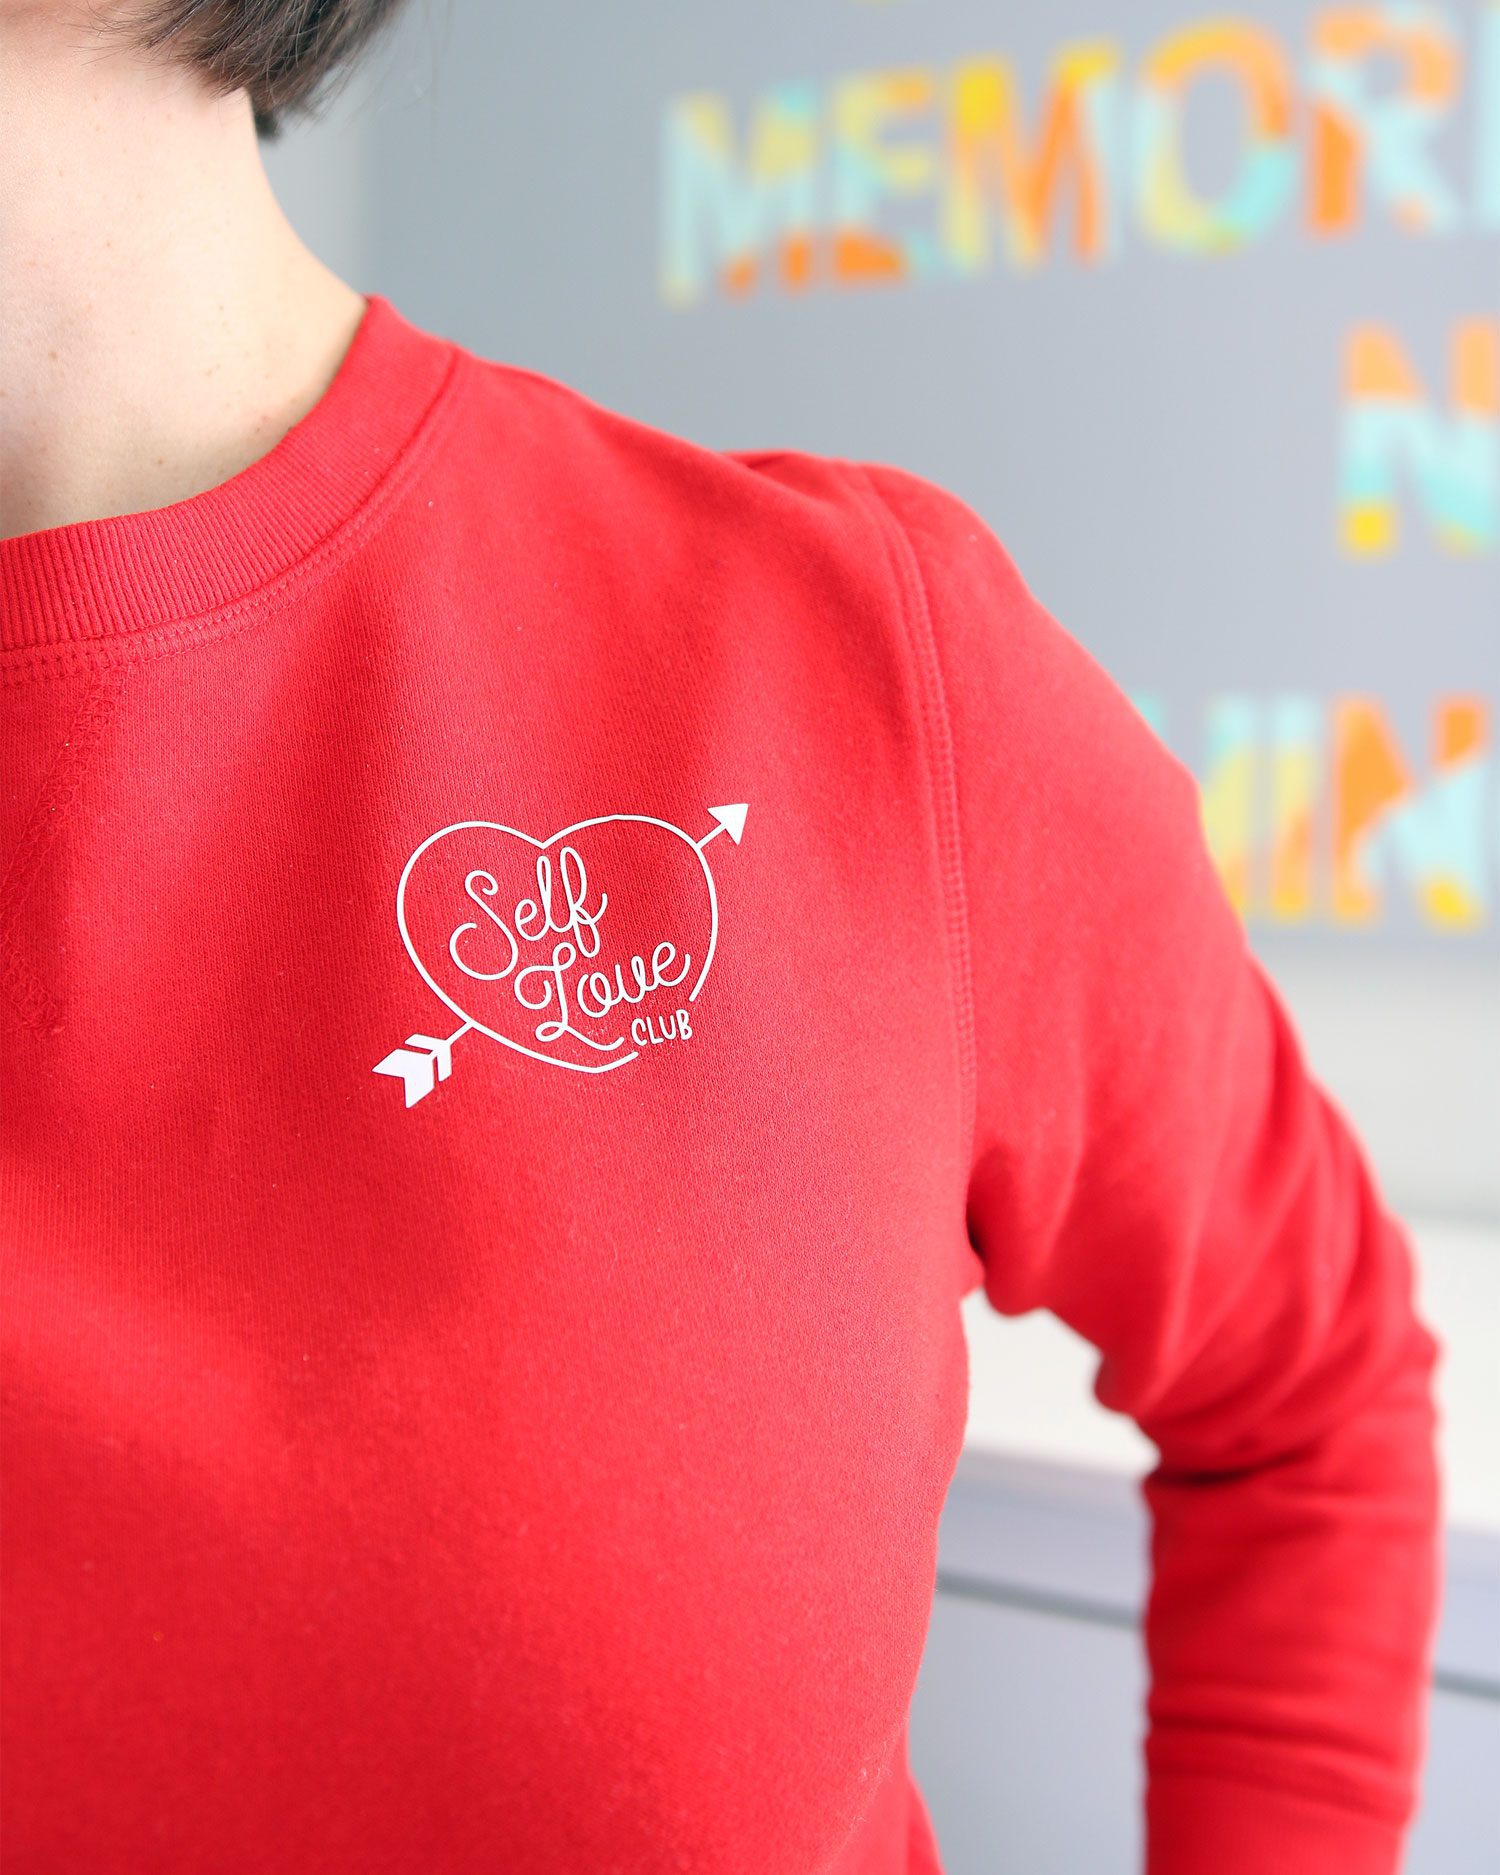 how-to-use-iron-on-vinyl-for-a-custom-sweatshirt-yay-day-paper